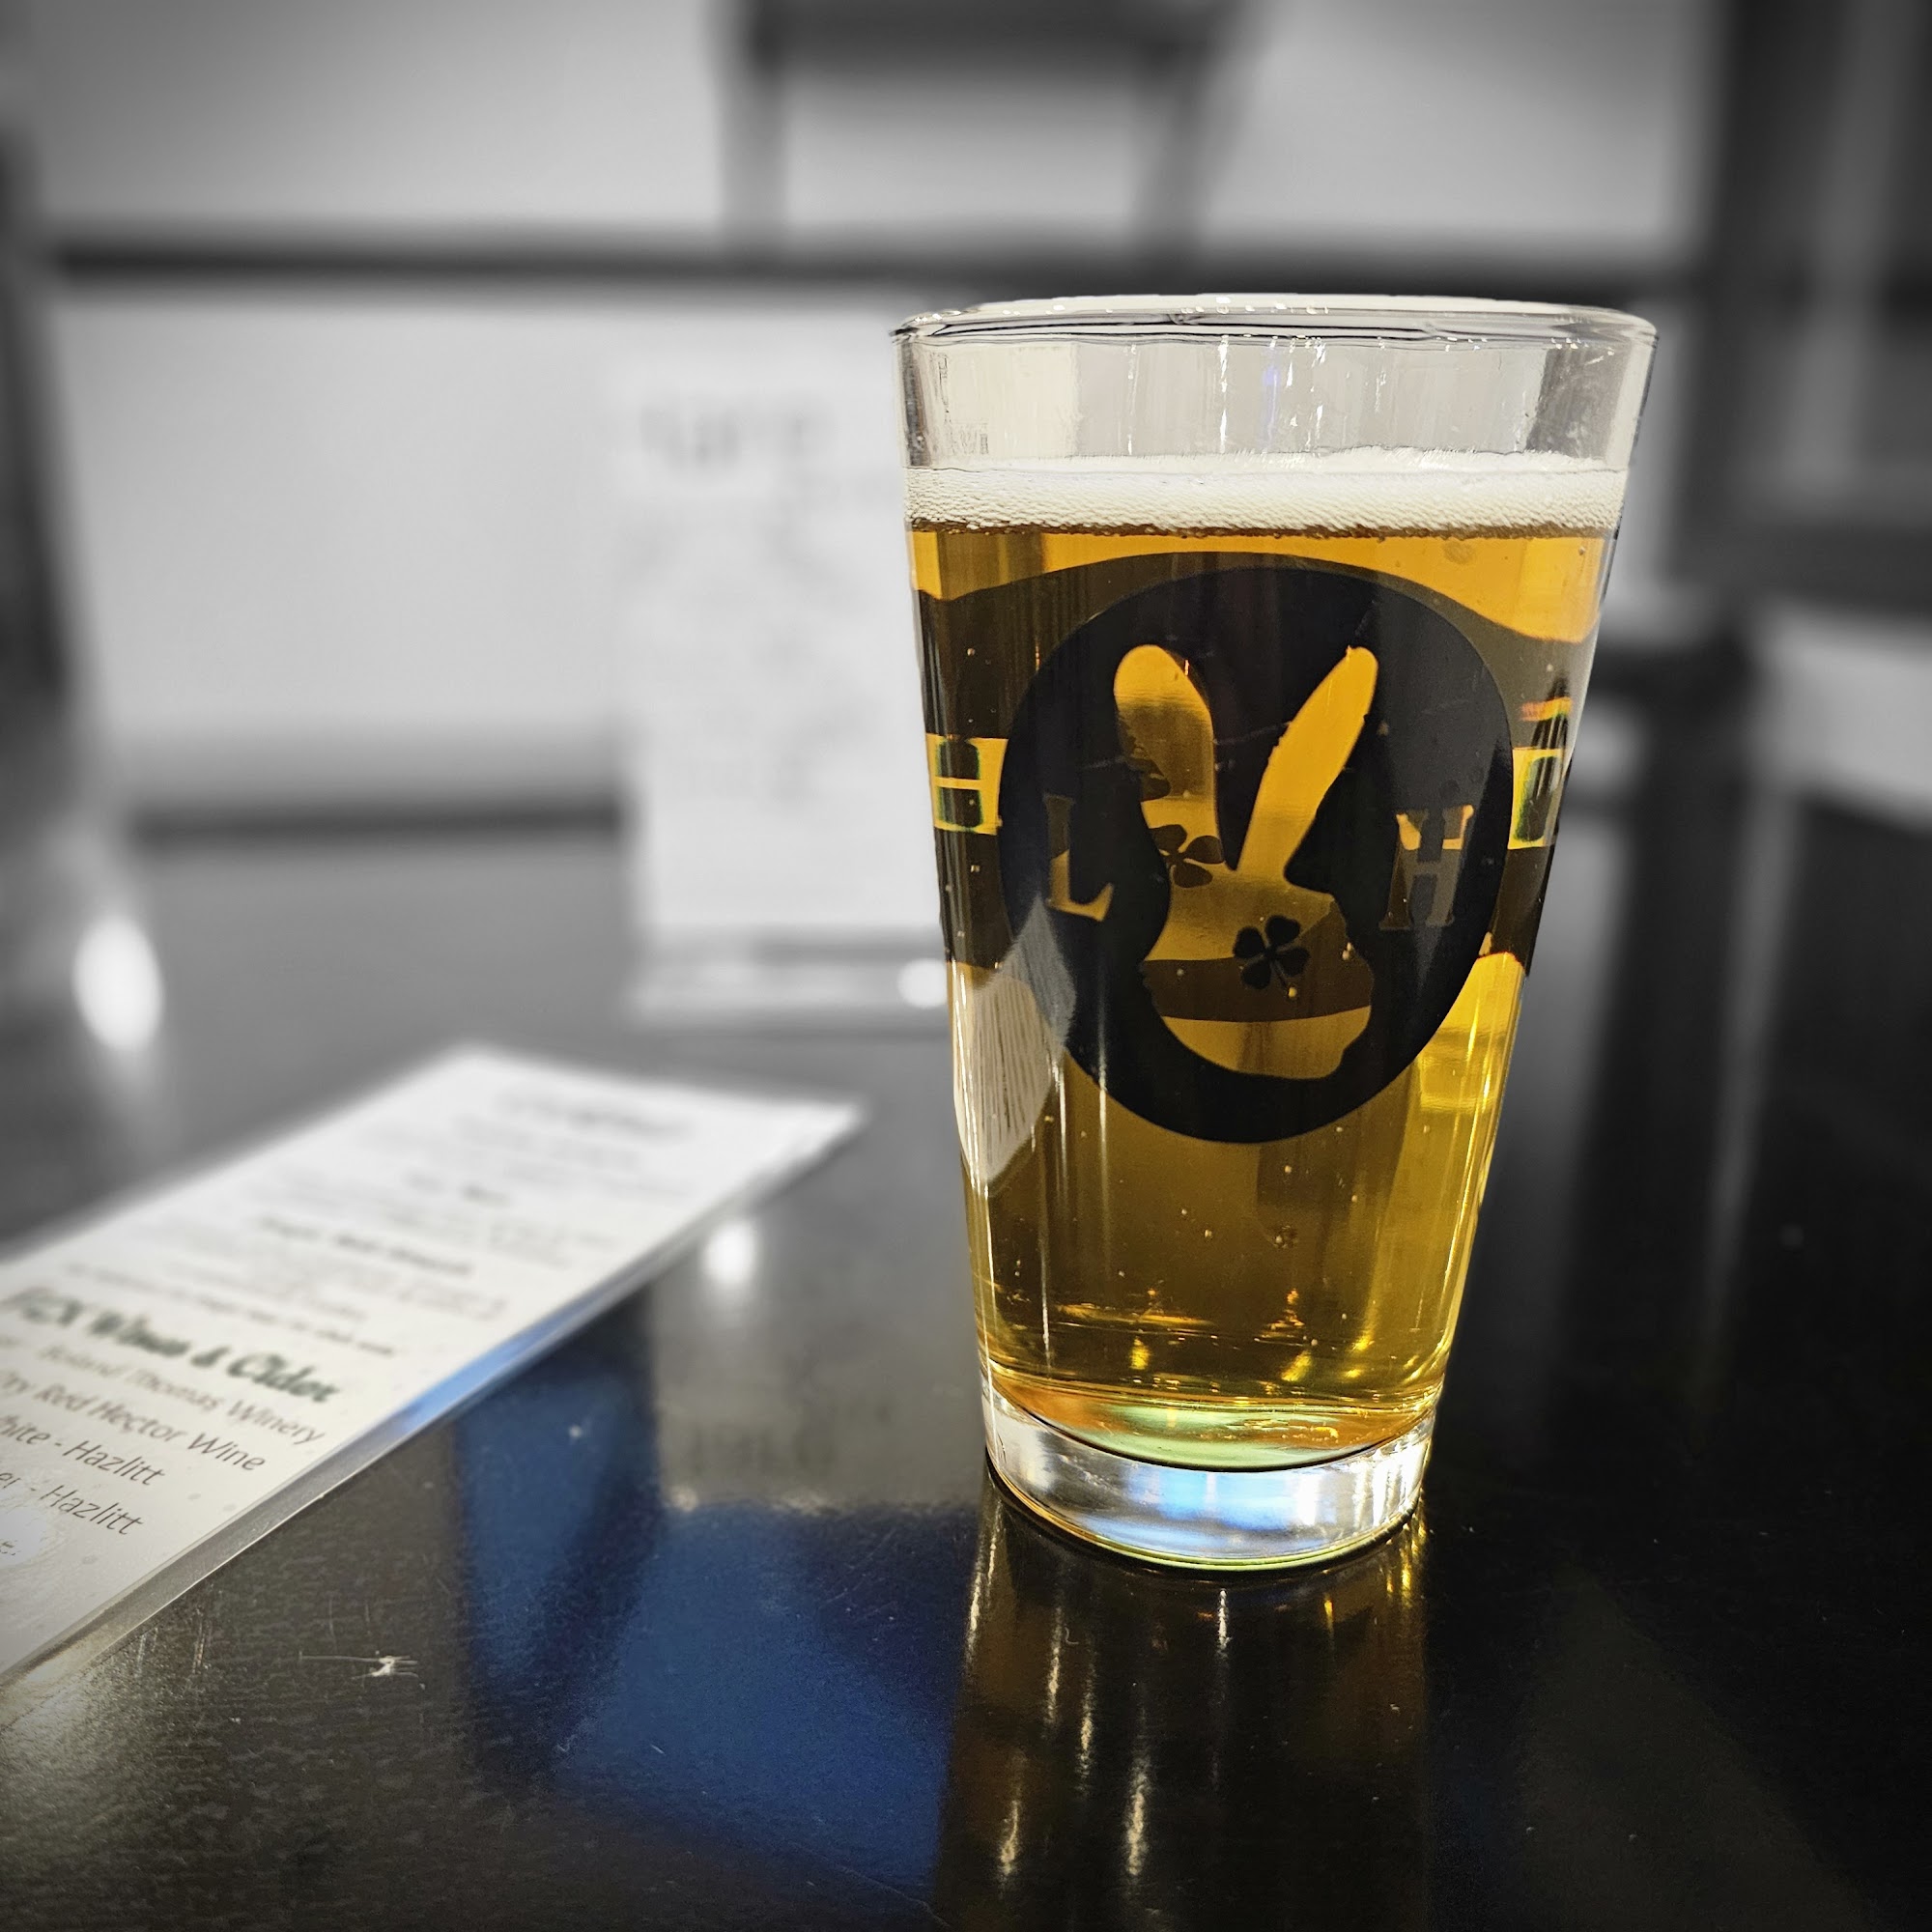 Lucky Hare Brewing Company